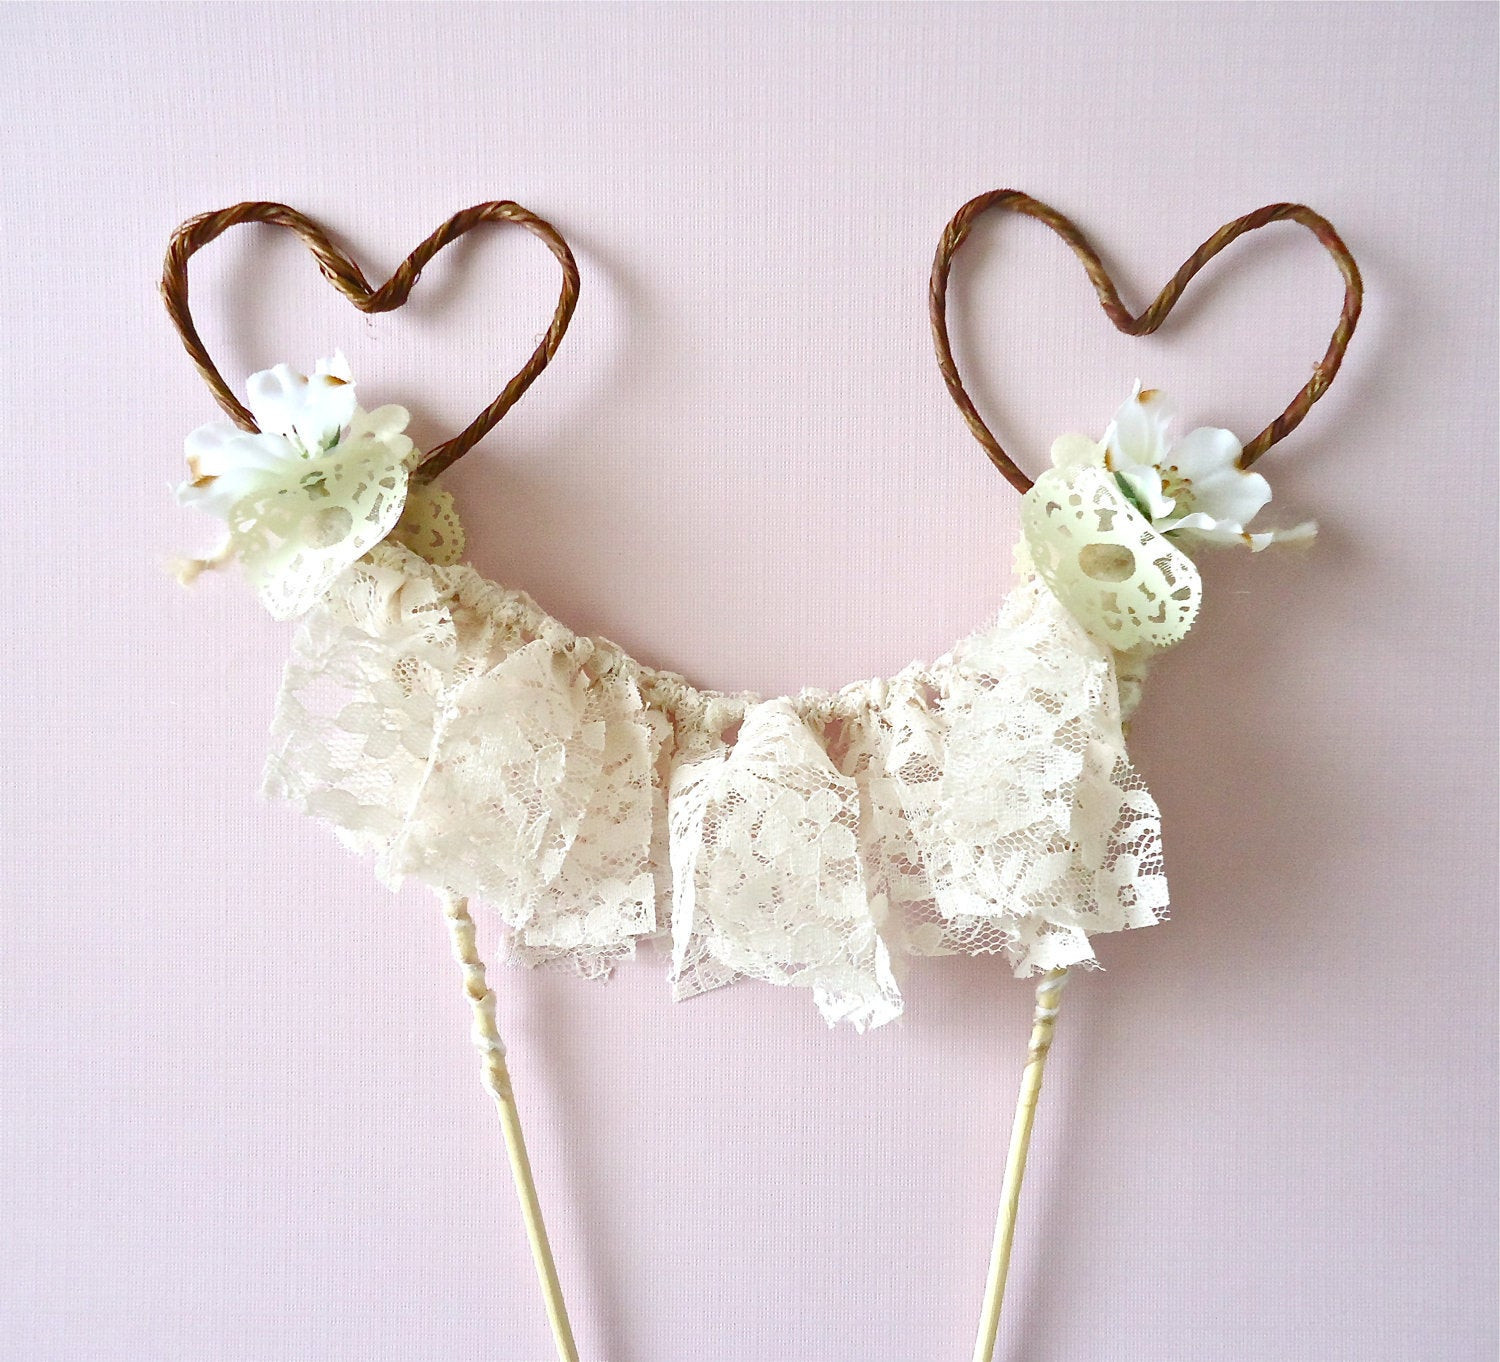 Heart Wedding Cake Toppers
 Unique Wedding Cake Topper Hearts and lace by